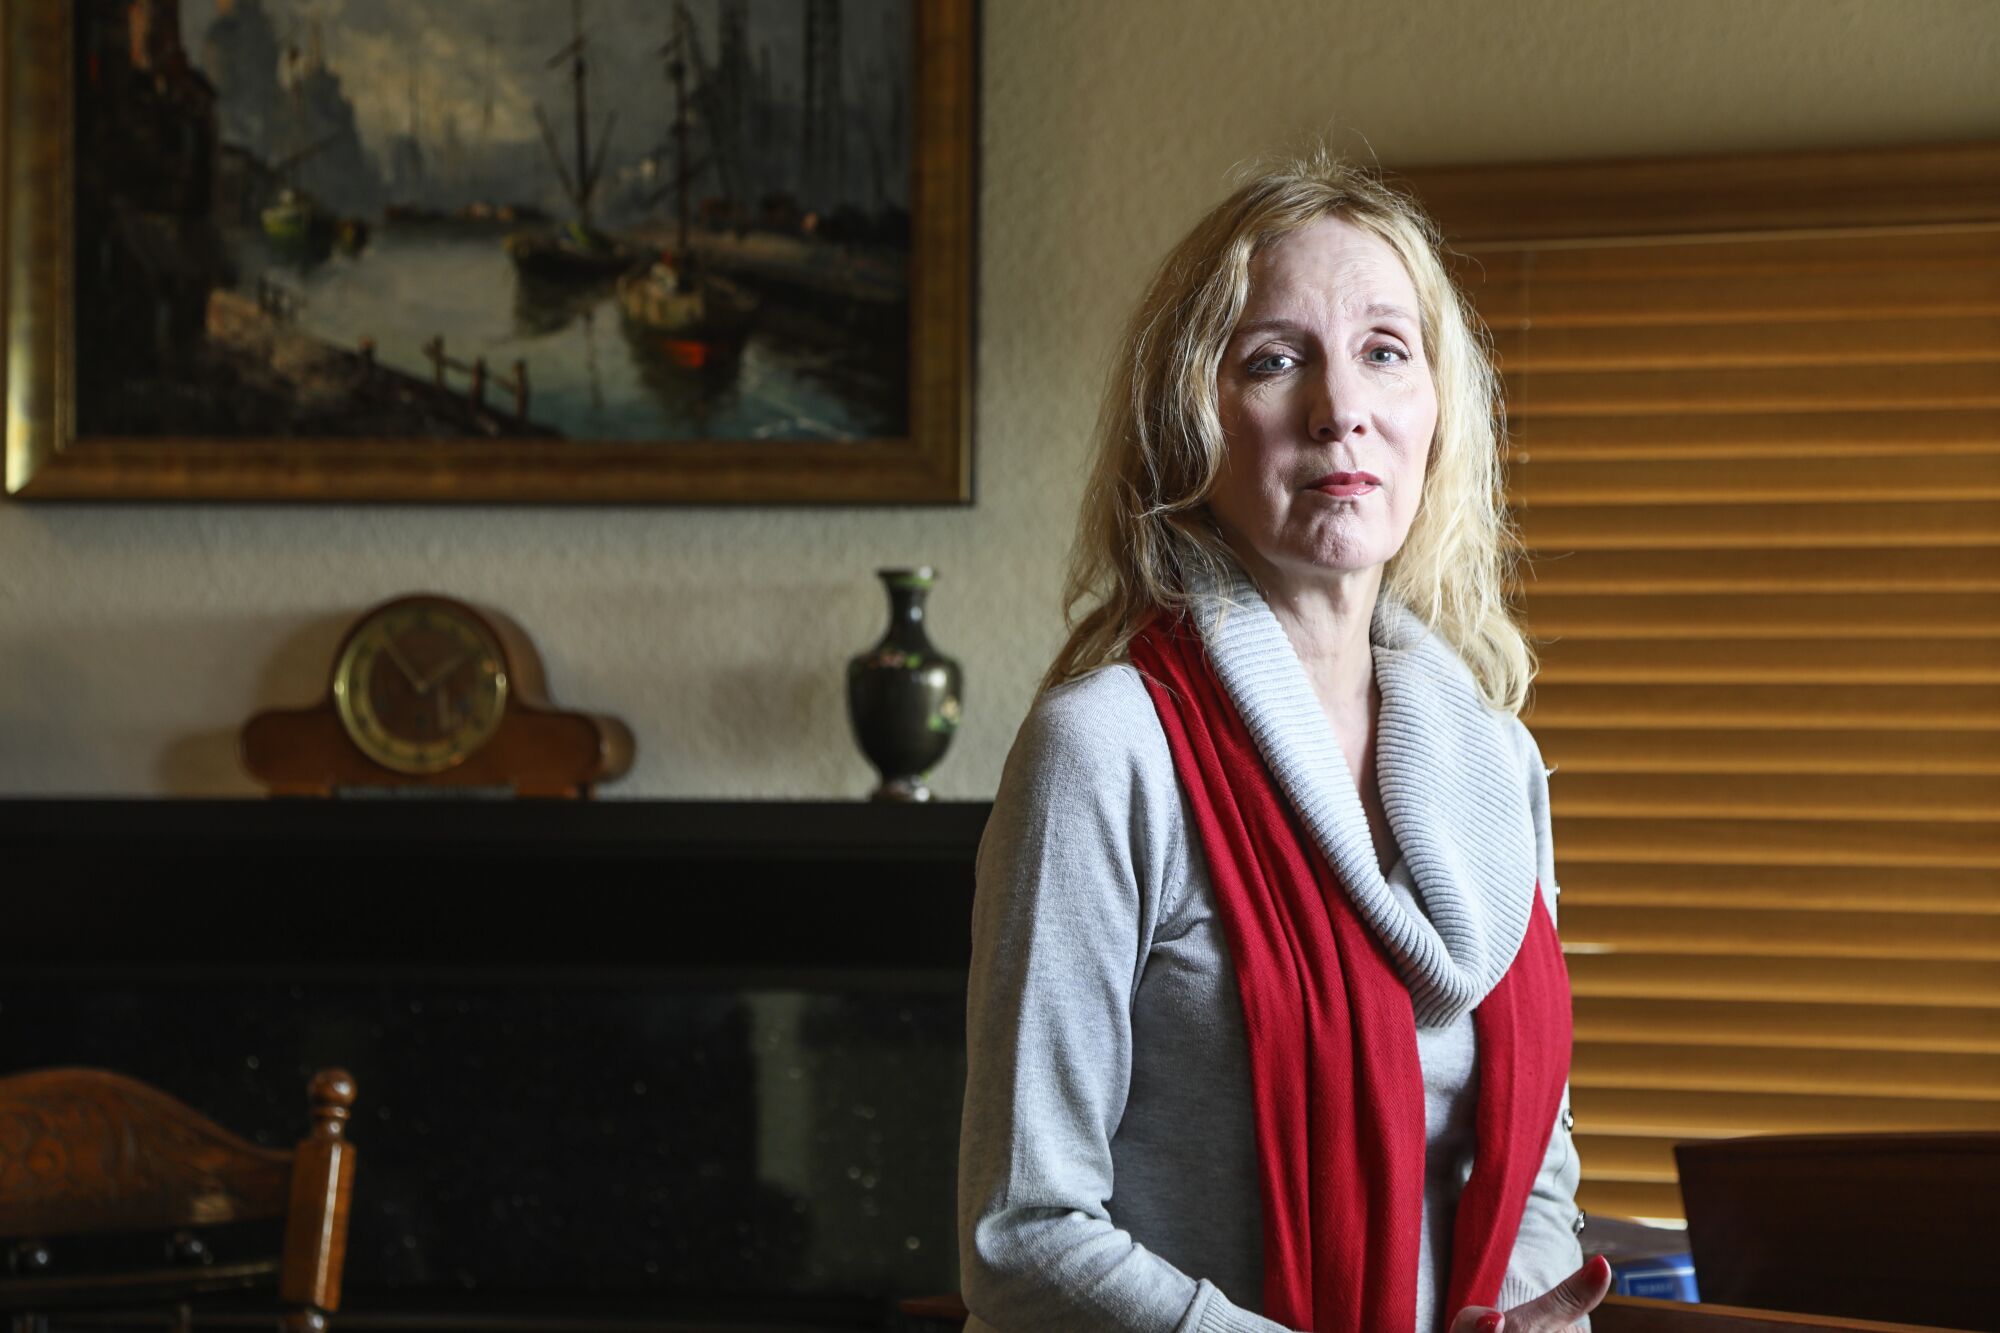 Cynthia Leigh poses for a photo at her home on March 18, 2020 in Tierra Santa, California. Her mother is at a senior living facility and she can only see her with a glass divider.